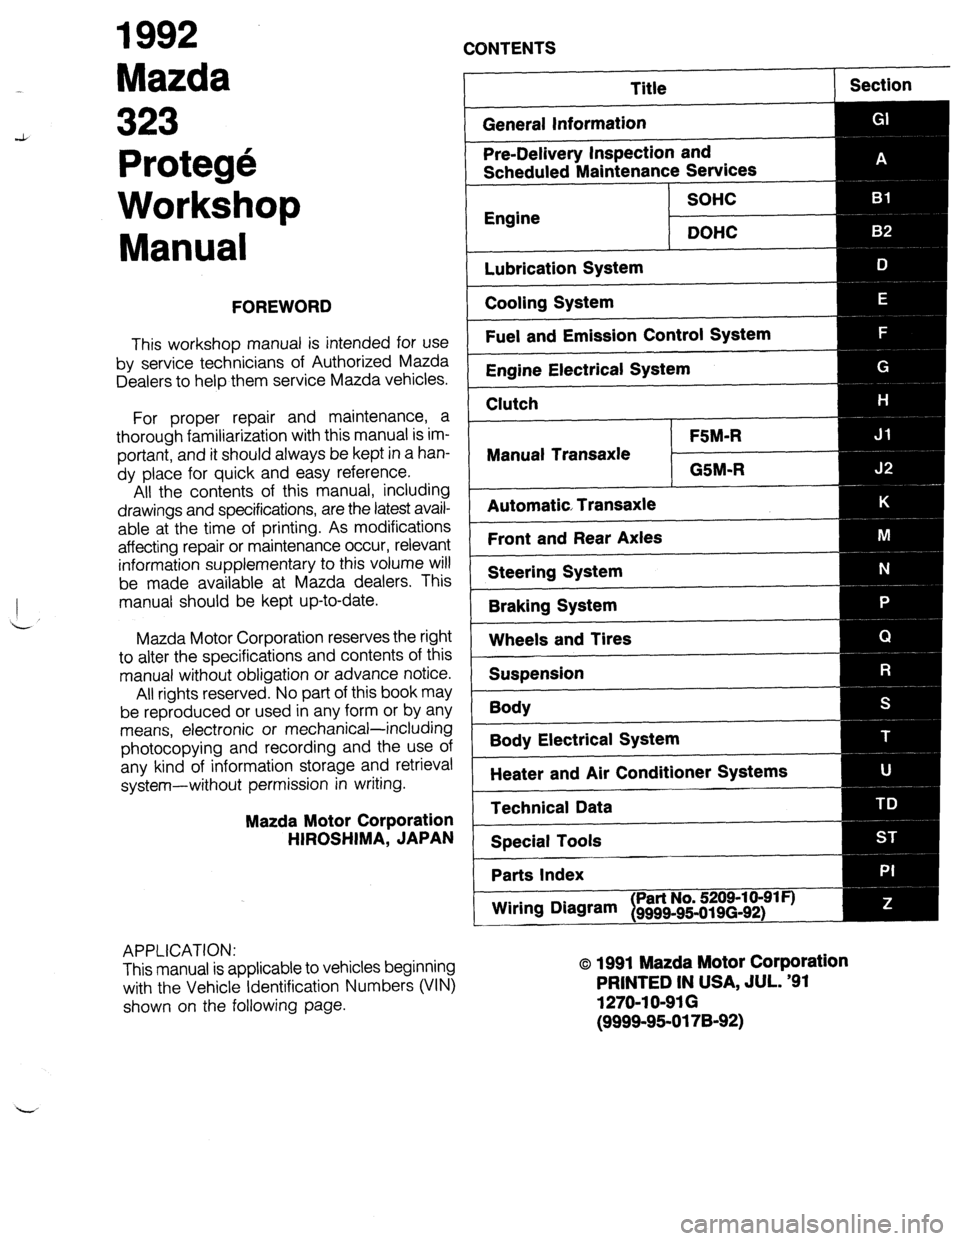 MAZDA PROTEGE 1992  Workshop Manual 1992 
Mazda 
CONTENTS 
Protege 
Workshop 
Manual 
FOREWORD 
This workshop manual is intended for use 
by service technicians of Authorized Mazda 
Dealers to help them service Mazda vehicles. 
For prop